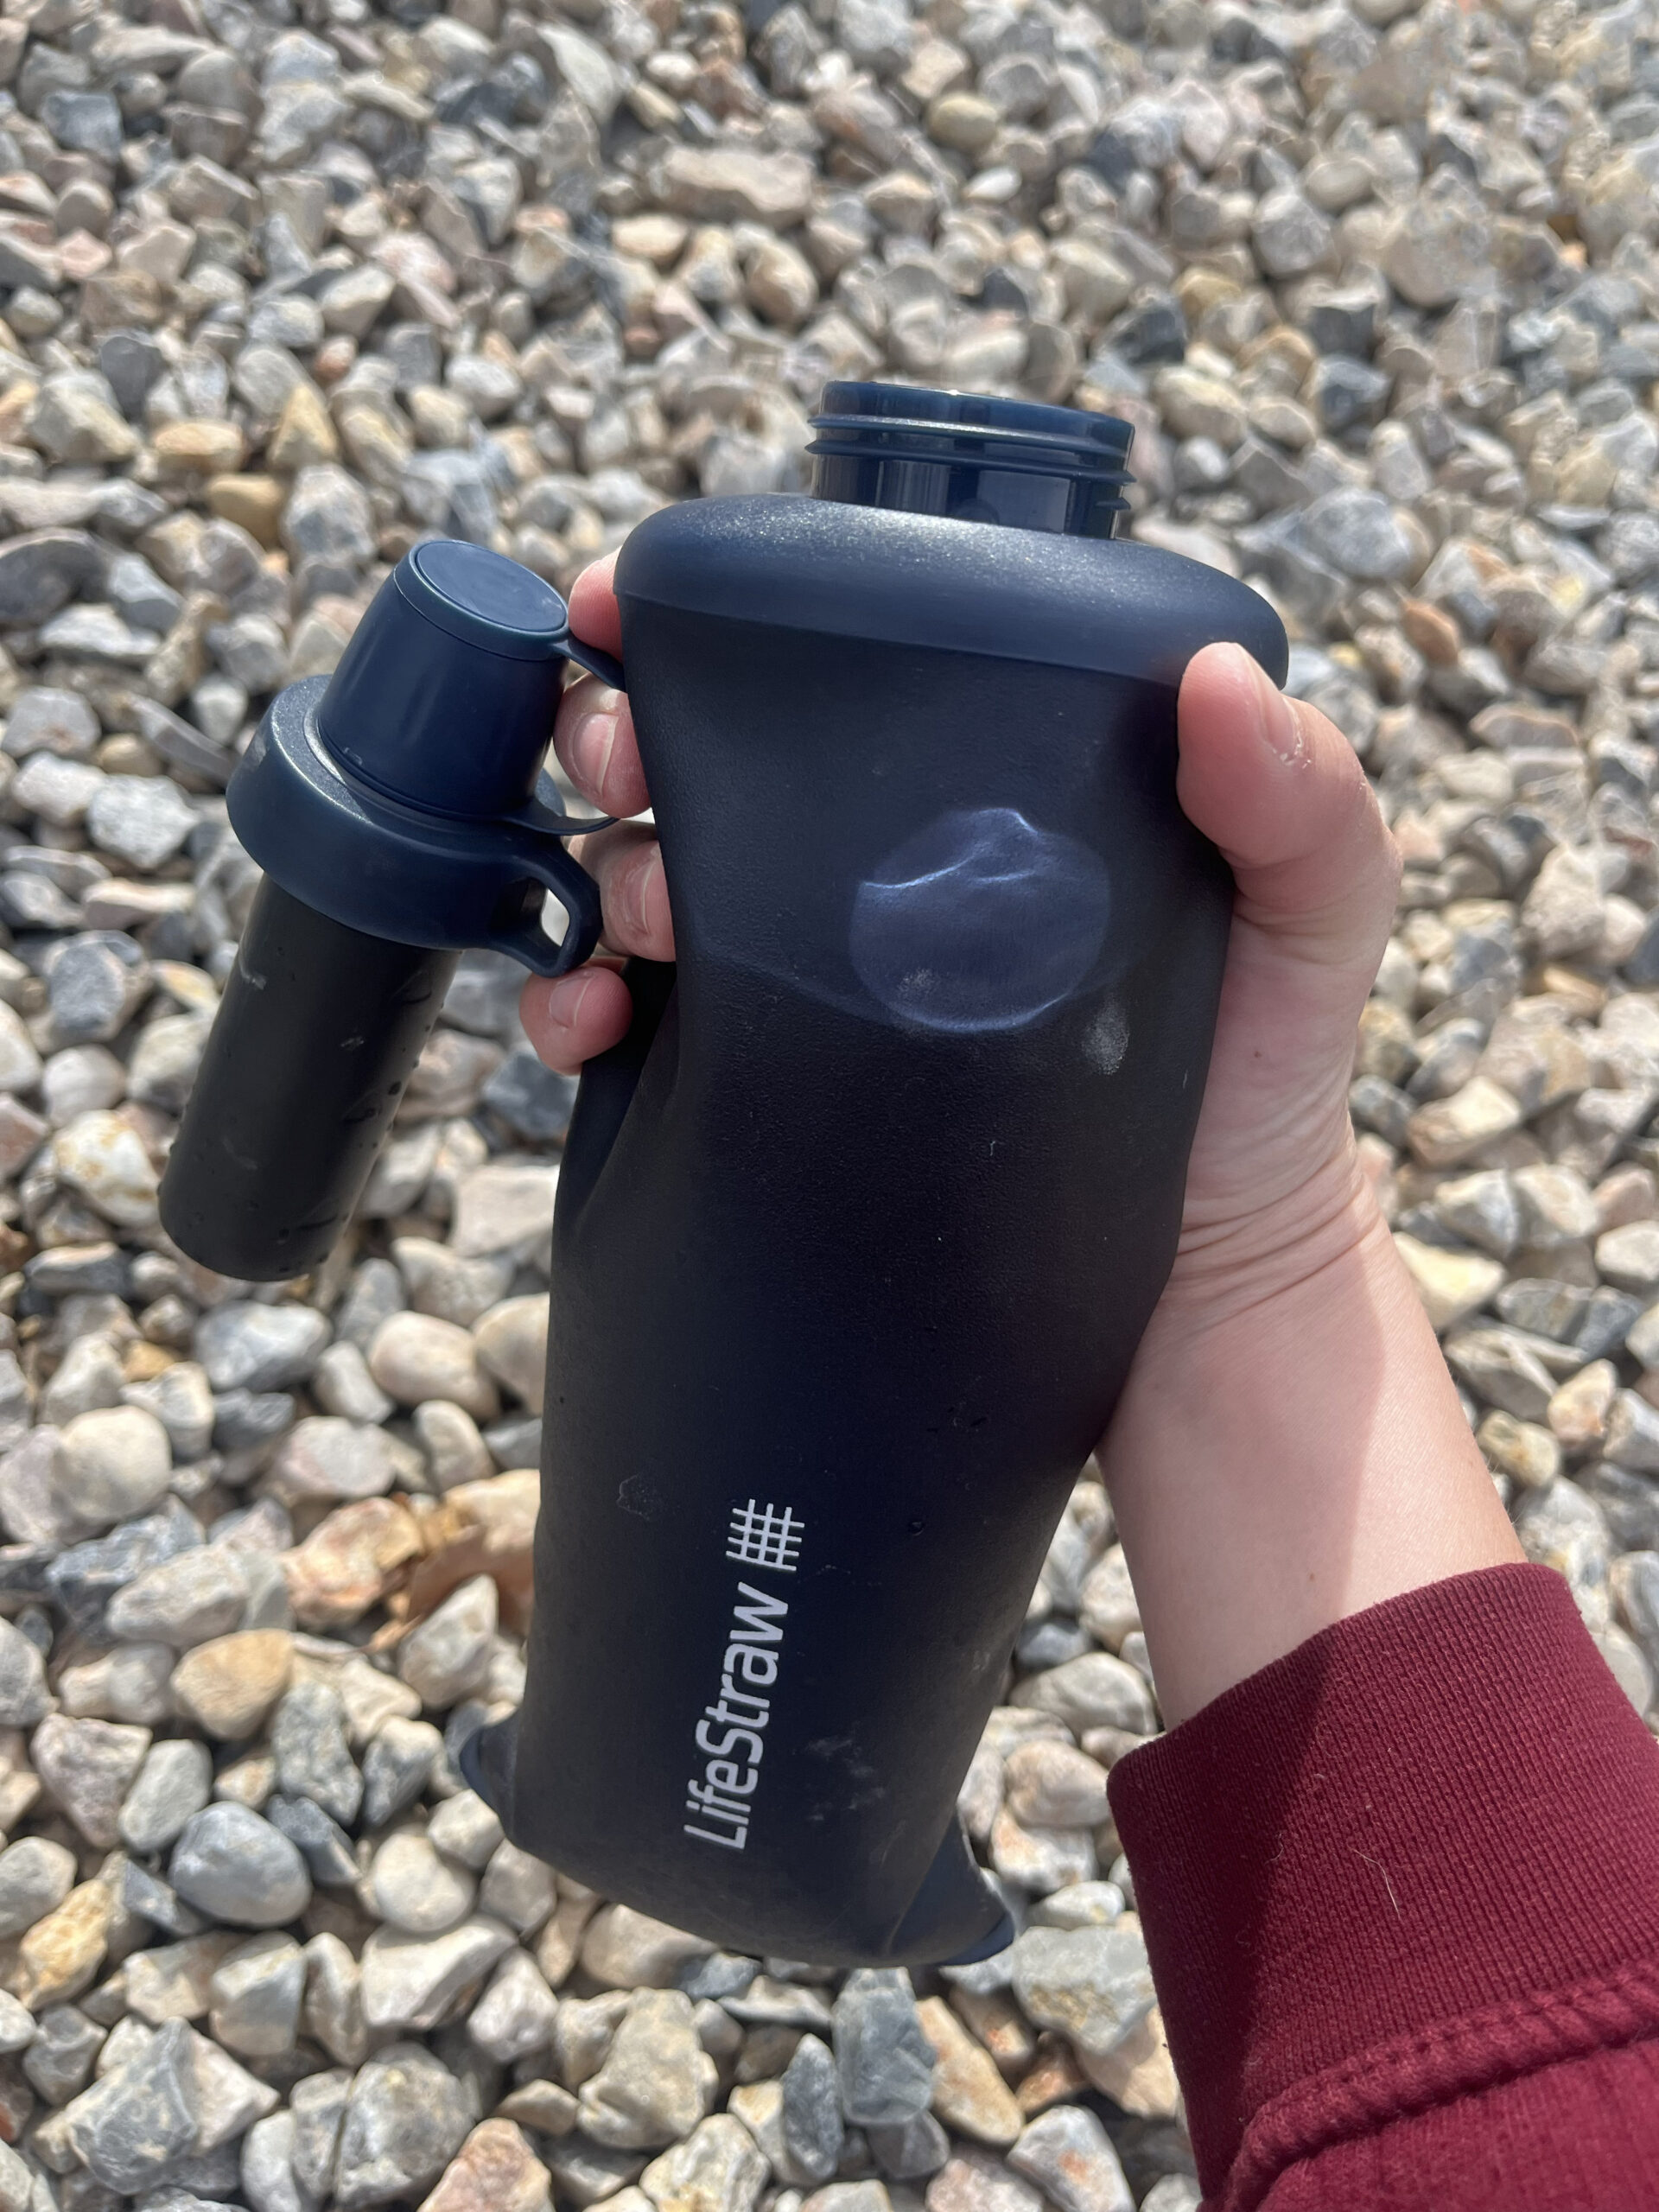 The LifeStraw Peak collapsible water bottle cap has a loop to keep the filter off the ground while filling.